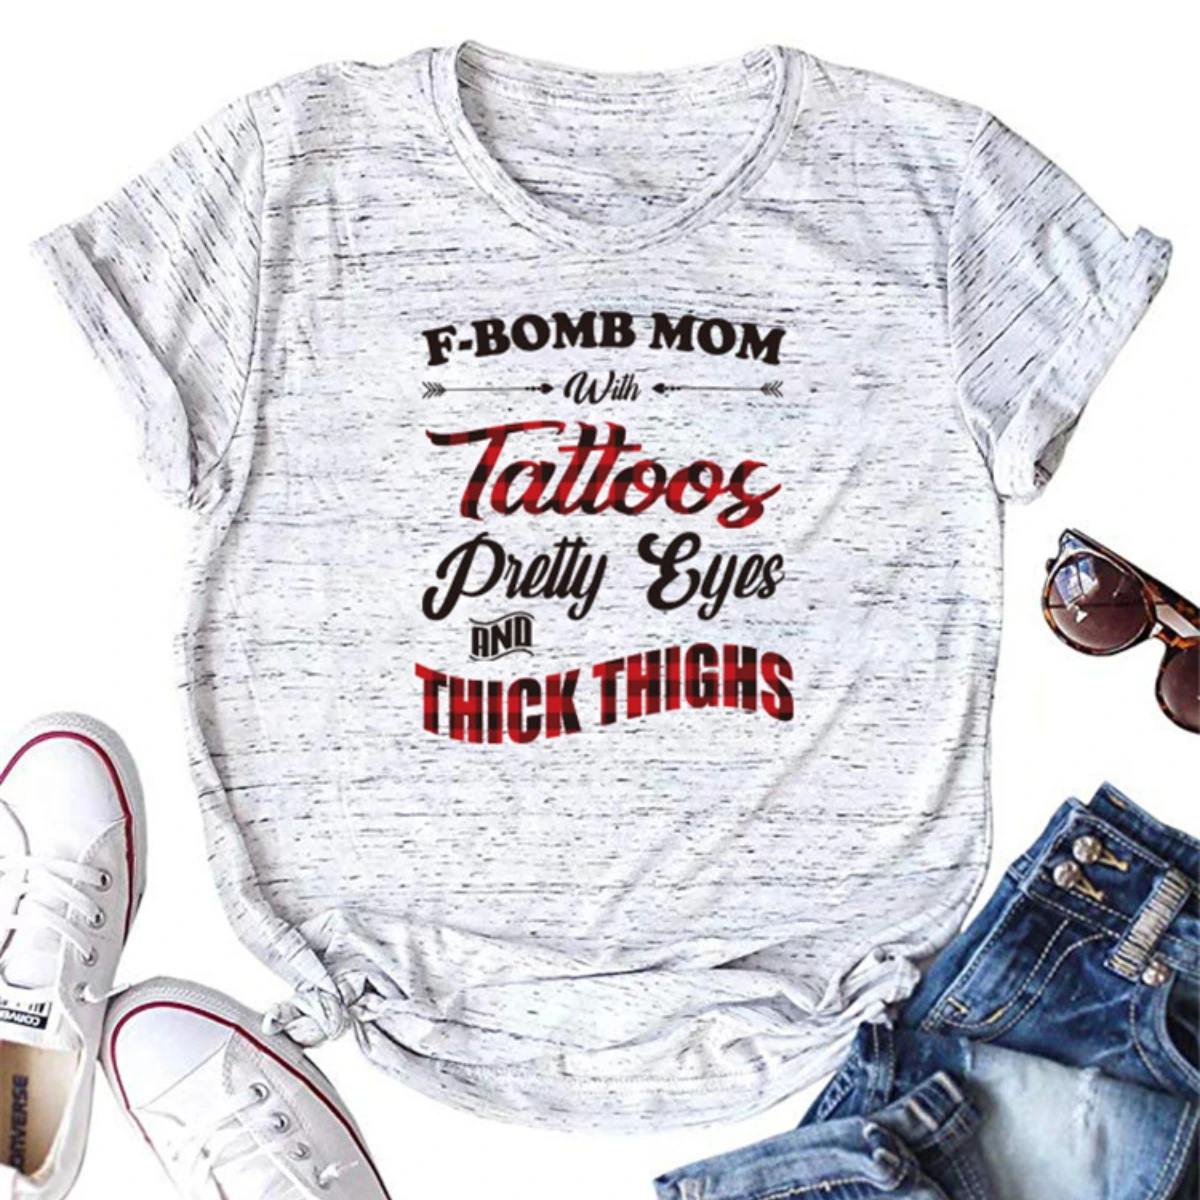 

Women Funny slogan T Shirts Creative F-BOMB Mom with Tattoos Pretty Eyes and Thick Thighs T-shirt Top Vintage Cussing O-Ncik Tee